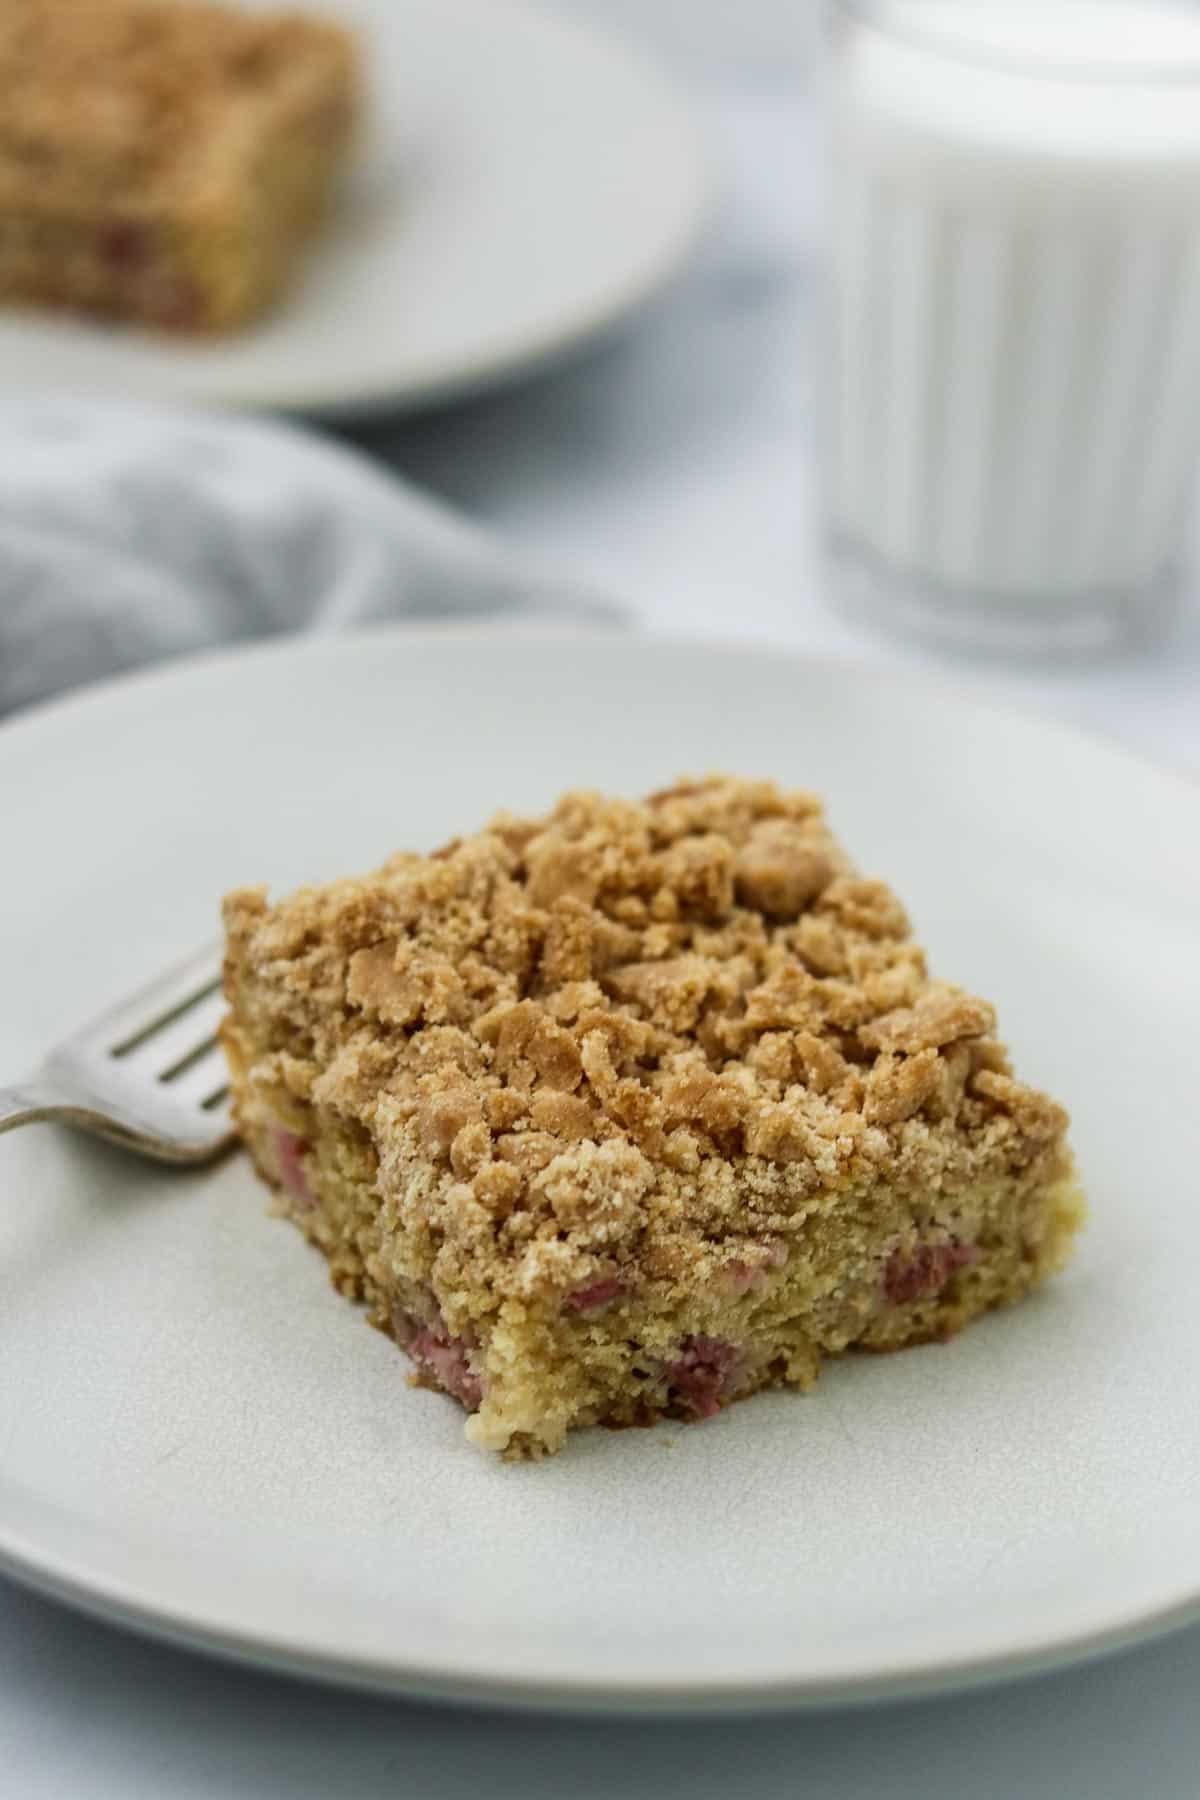 Old-Fashioned Norwegian Rhubarb Crumb Cake on a plate next to a glass of milk.